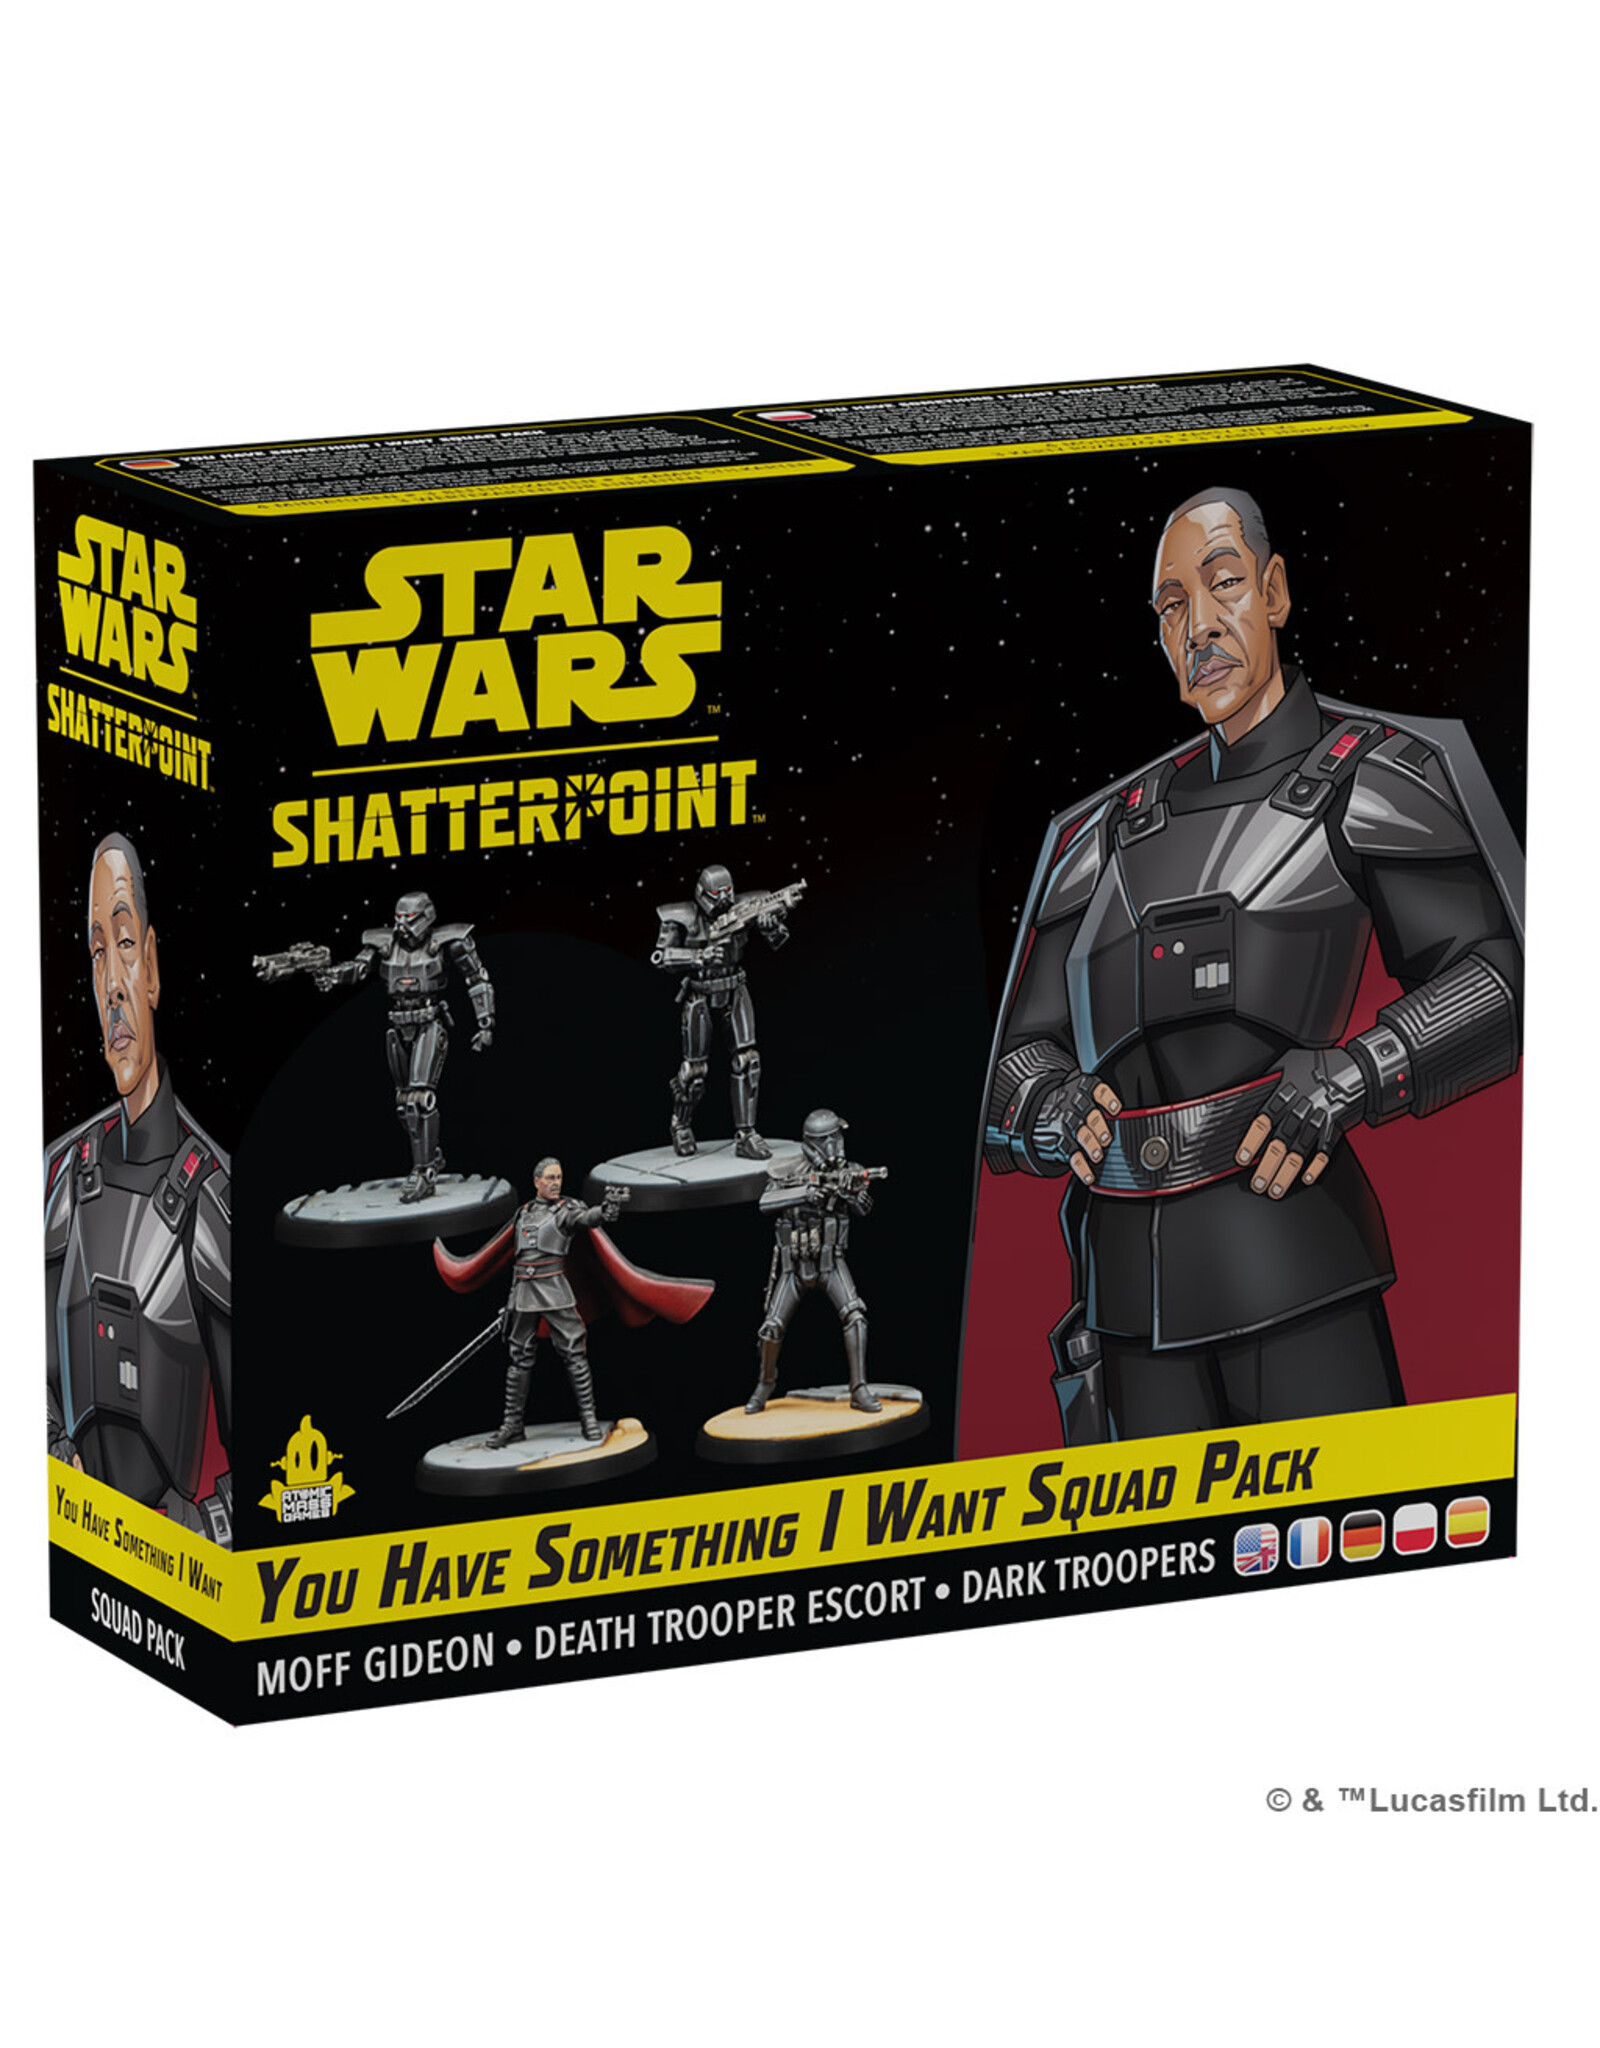 Star Wars Shatterpoint Star Wars Shatterpoint  You Have Something I Want Squad Pack